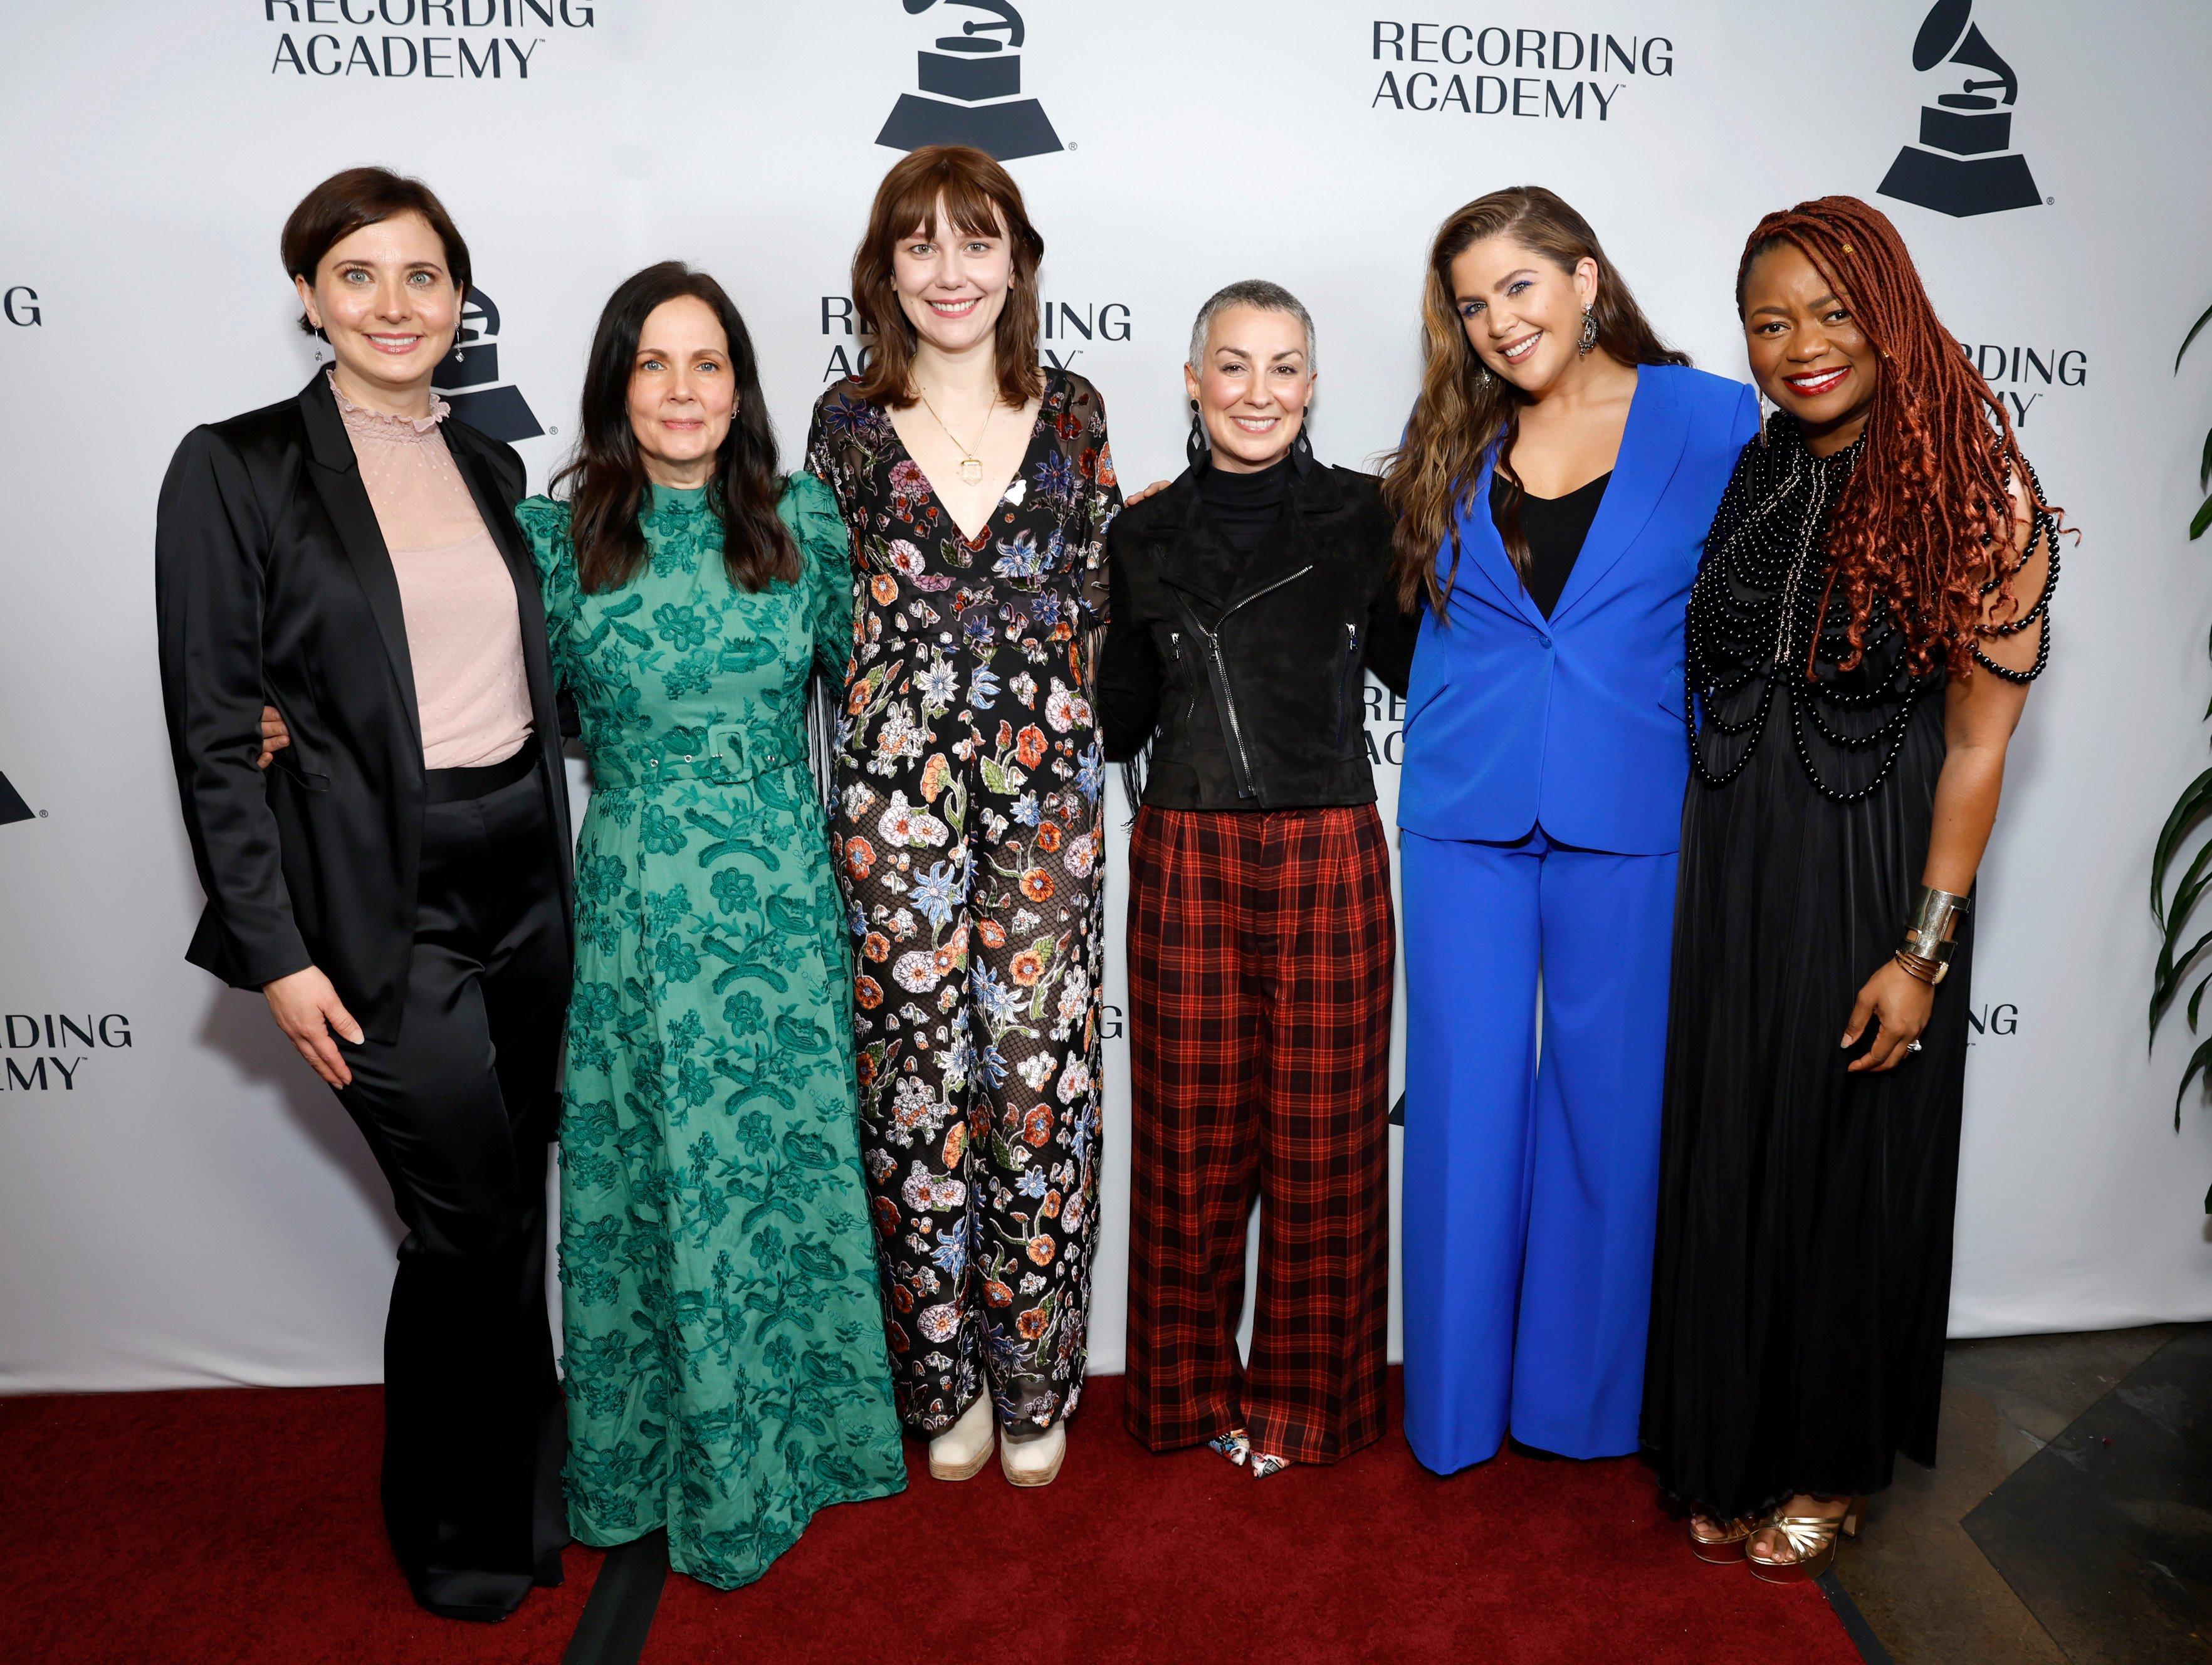 A Look Inside The 2023 Recording Academy Nashville Chapter Nominee Celebration, A Tribute To Its Supportive Musical Community GRAMMY image